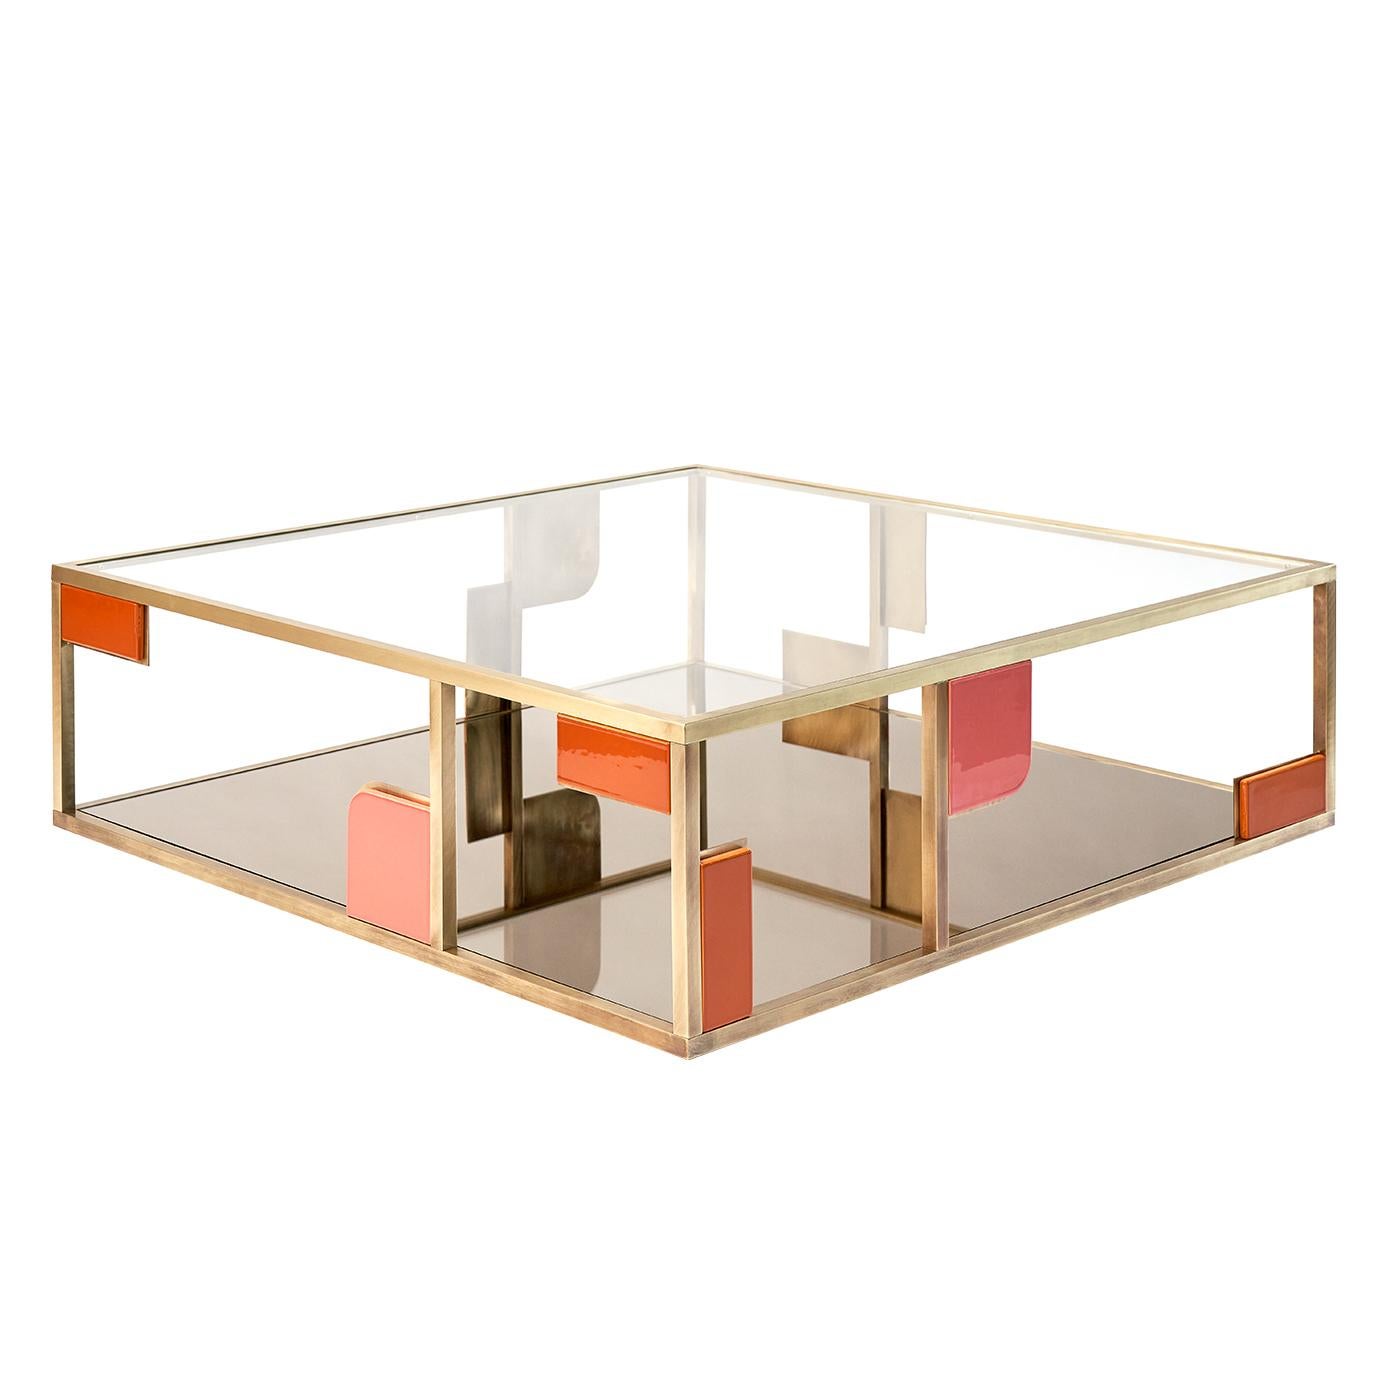 Part of the Sunset Collection of furniture and lighting fixtures, this stunning coffee table is a contemporary, sculptural design by La Récréation - P.Angelo Orecchioni architects. Enclosed in a clean, brass structure, it features geometric